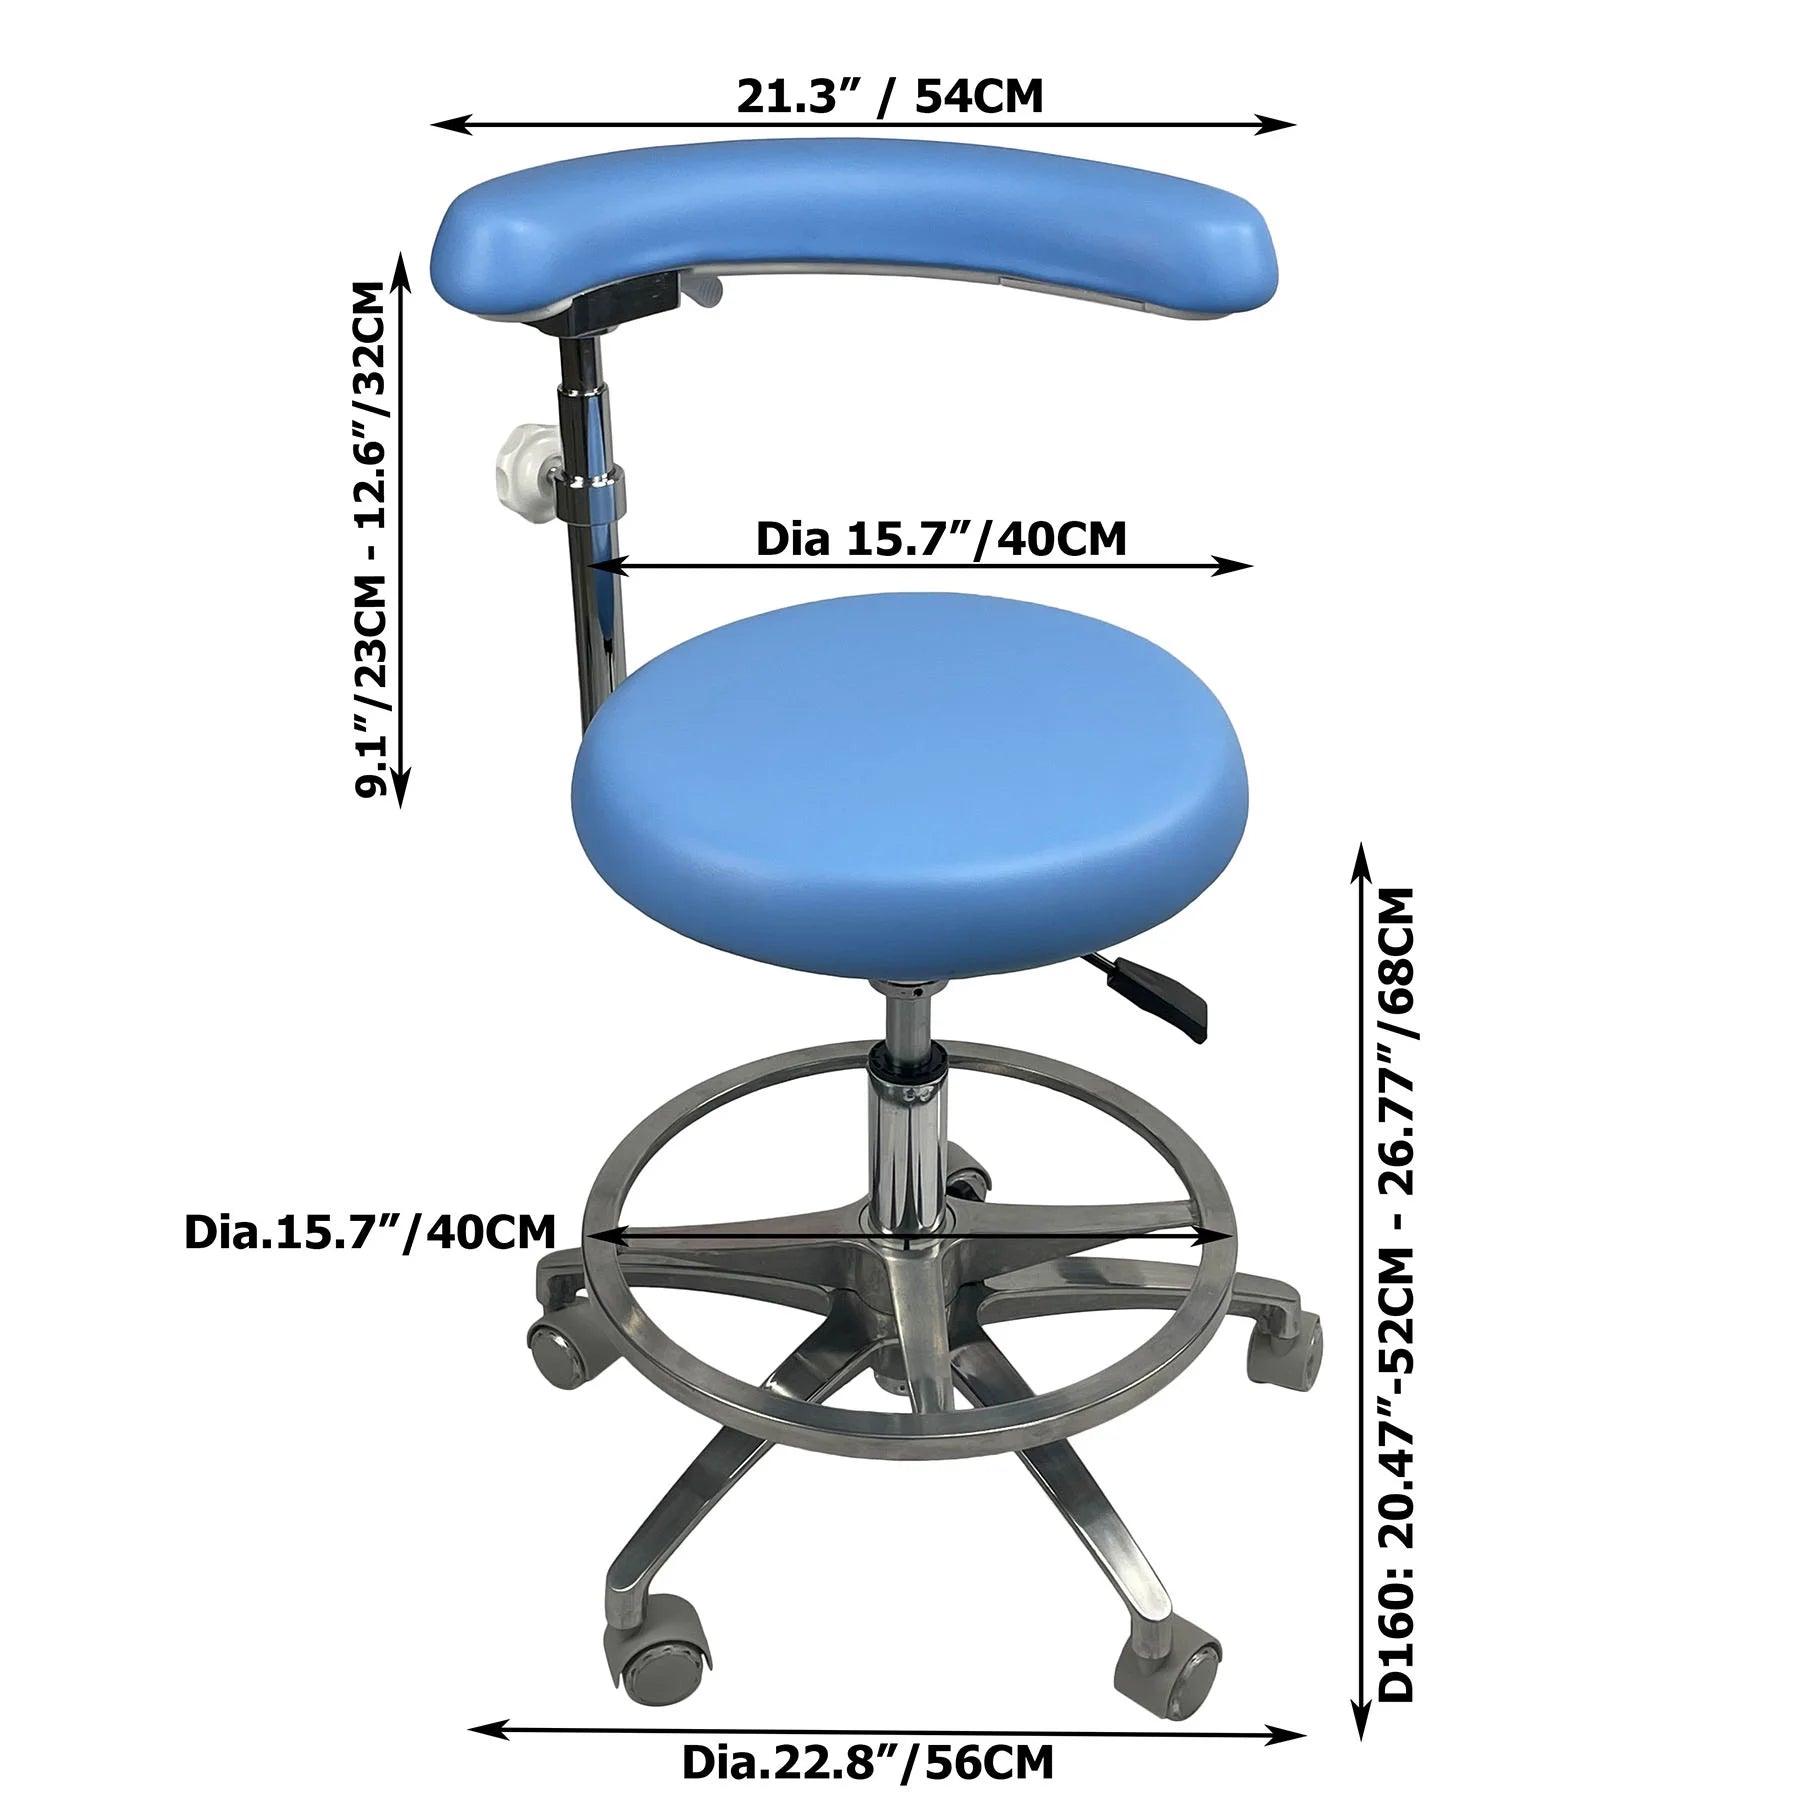 Dental stool demension for the seat and base